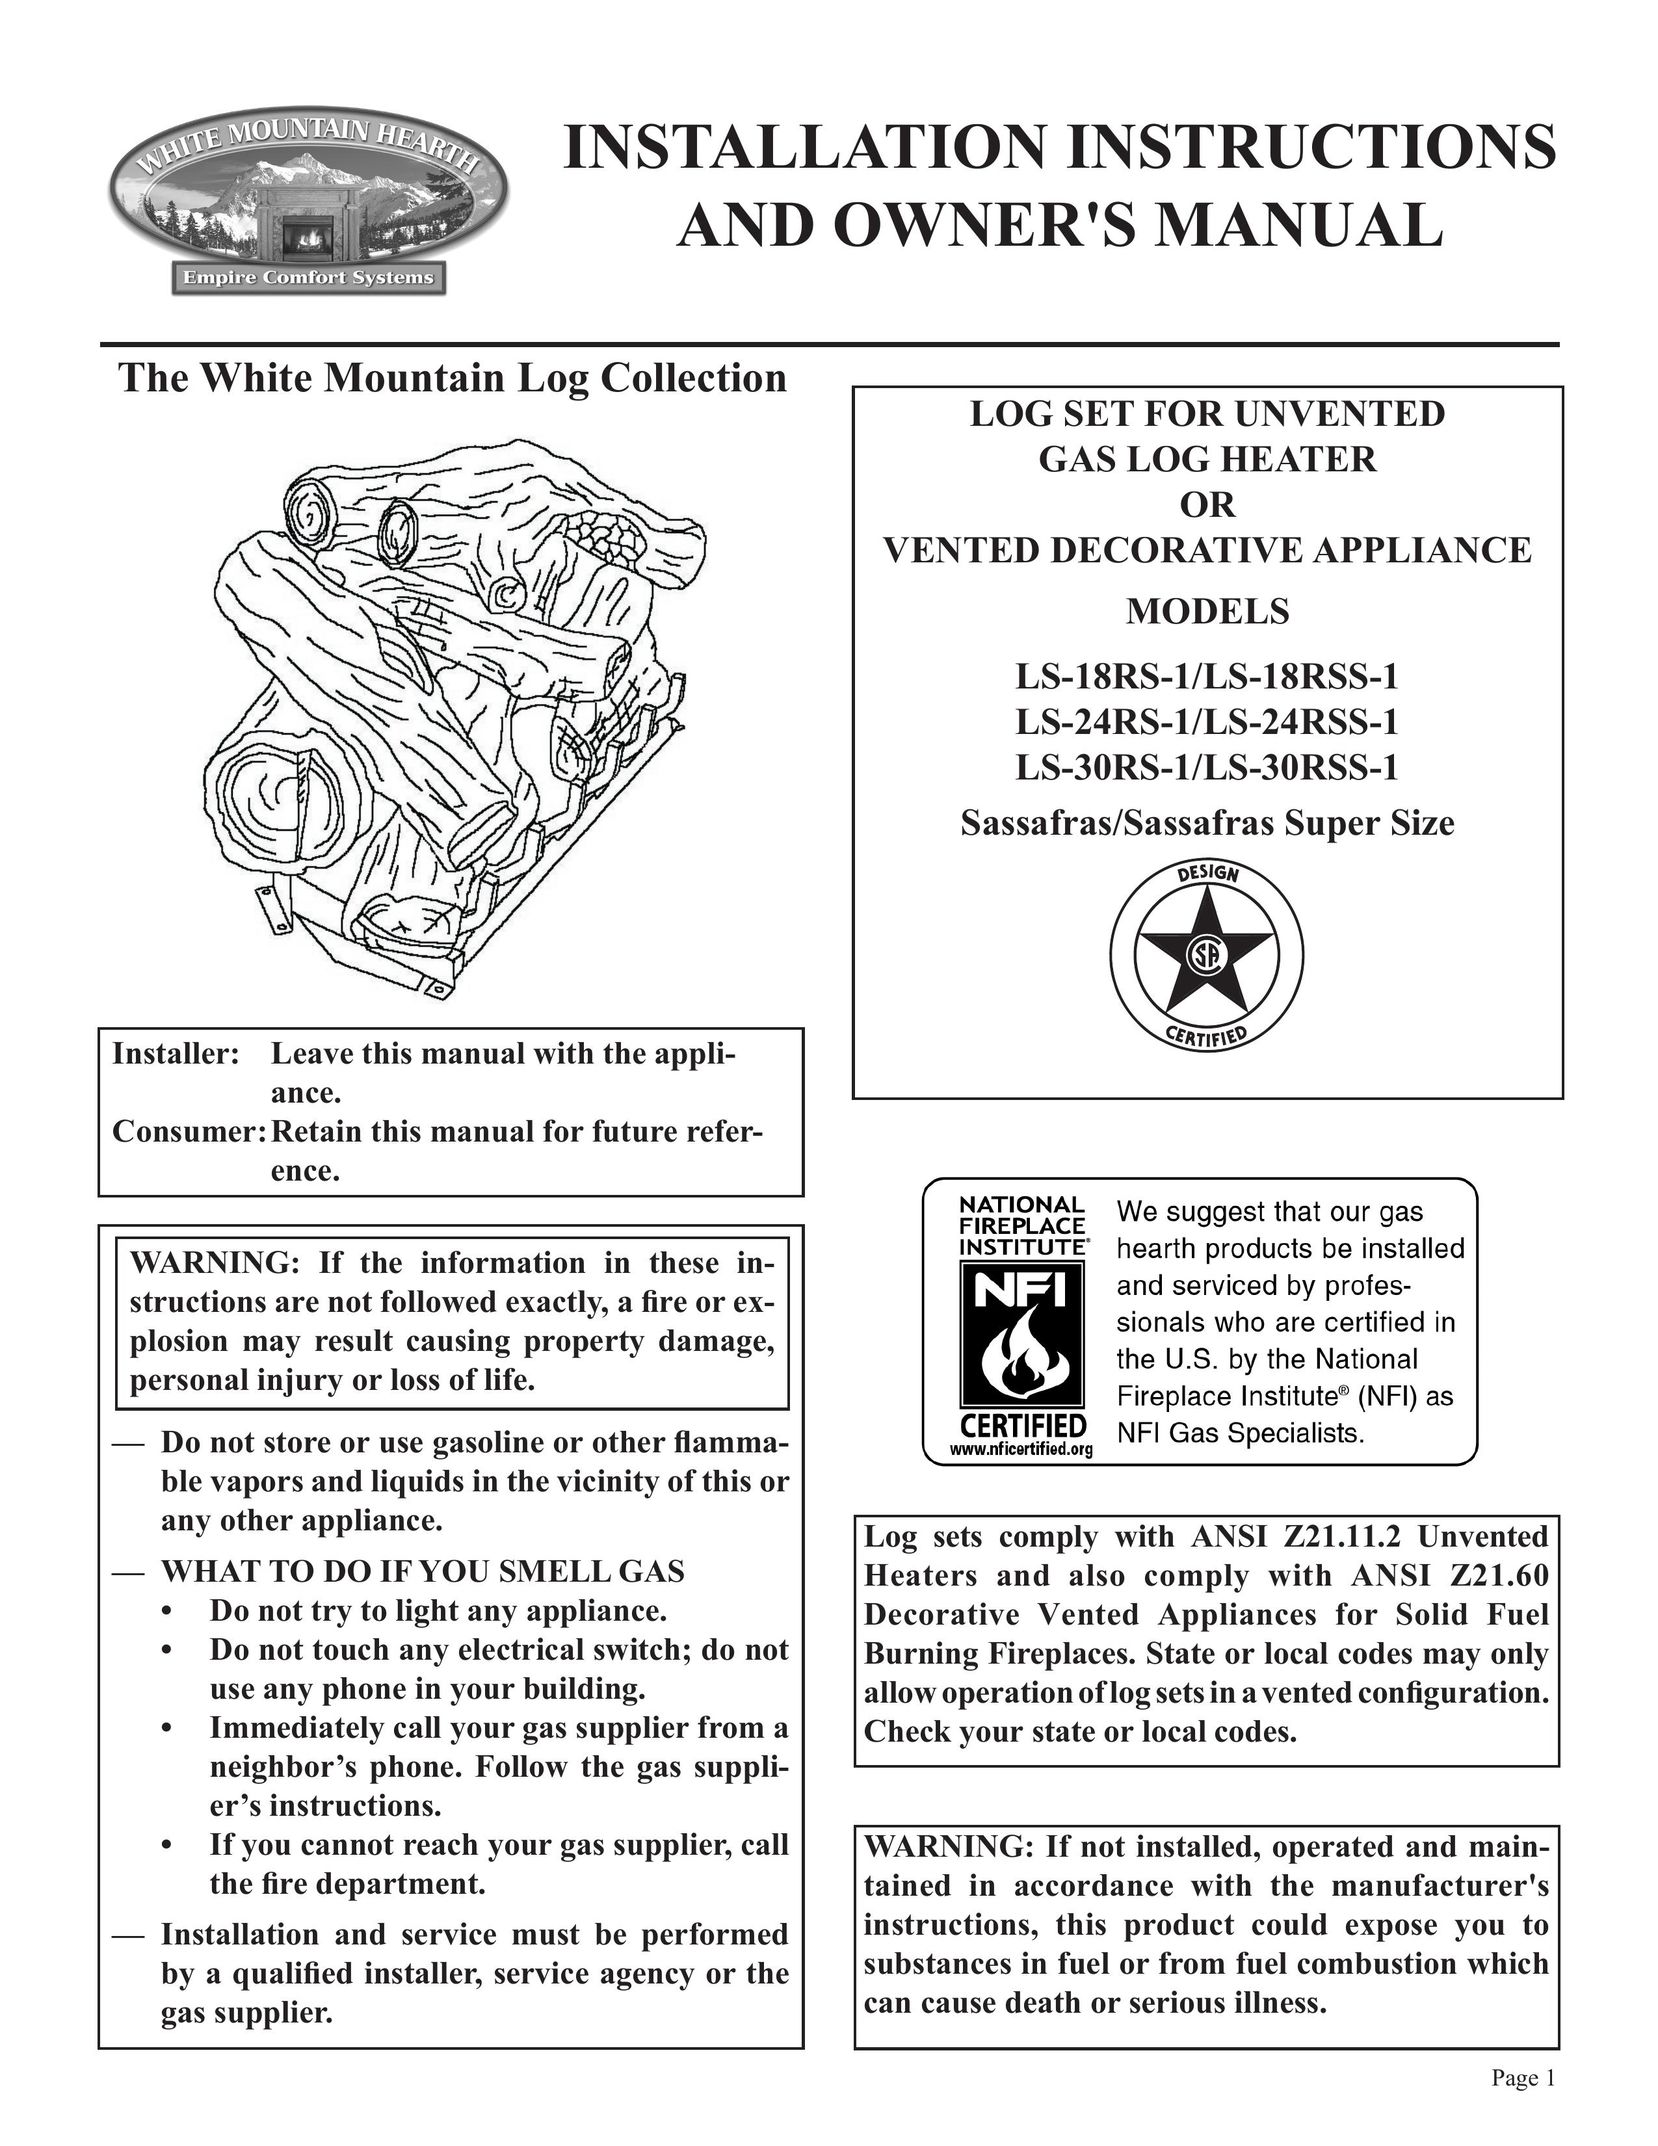 Empire Comfort Systems LS-18RSS-1 Gas Heater User Manual